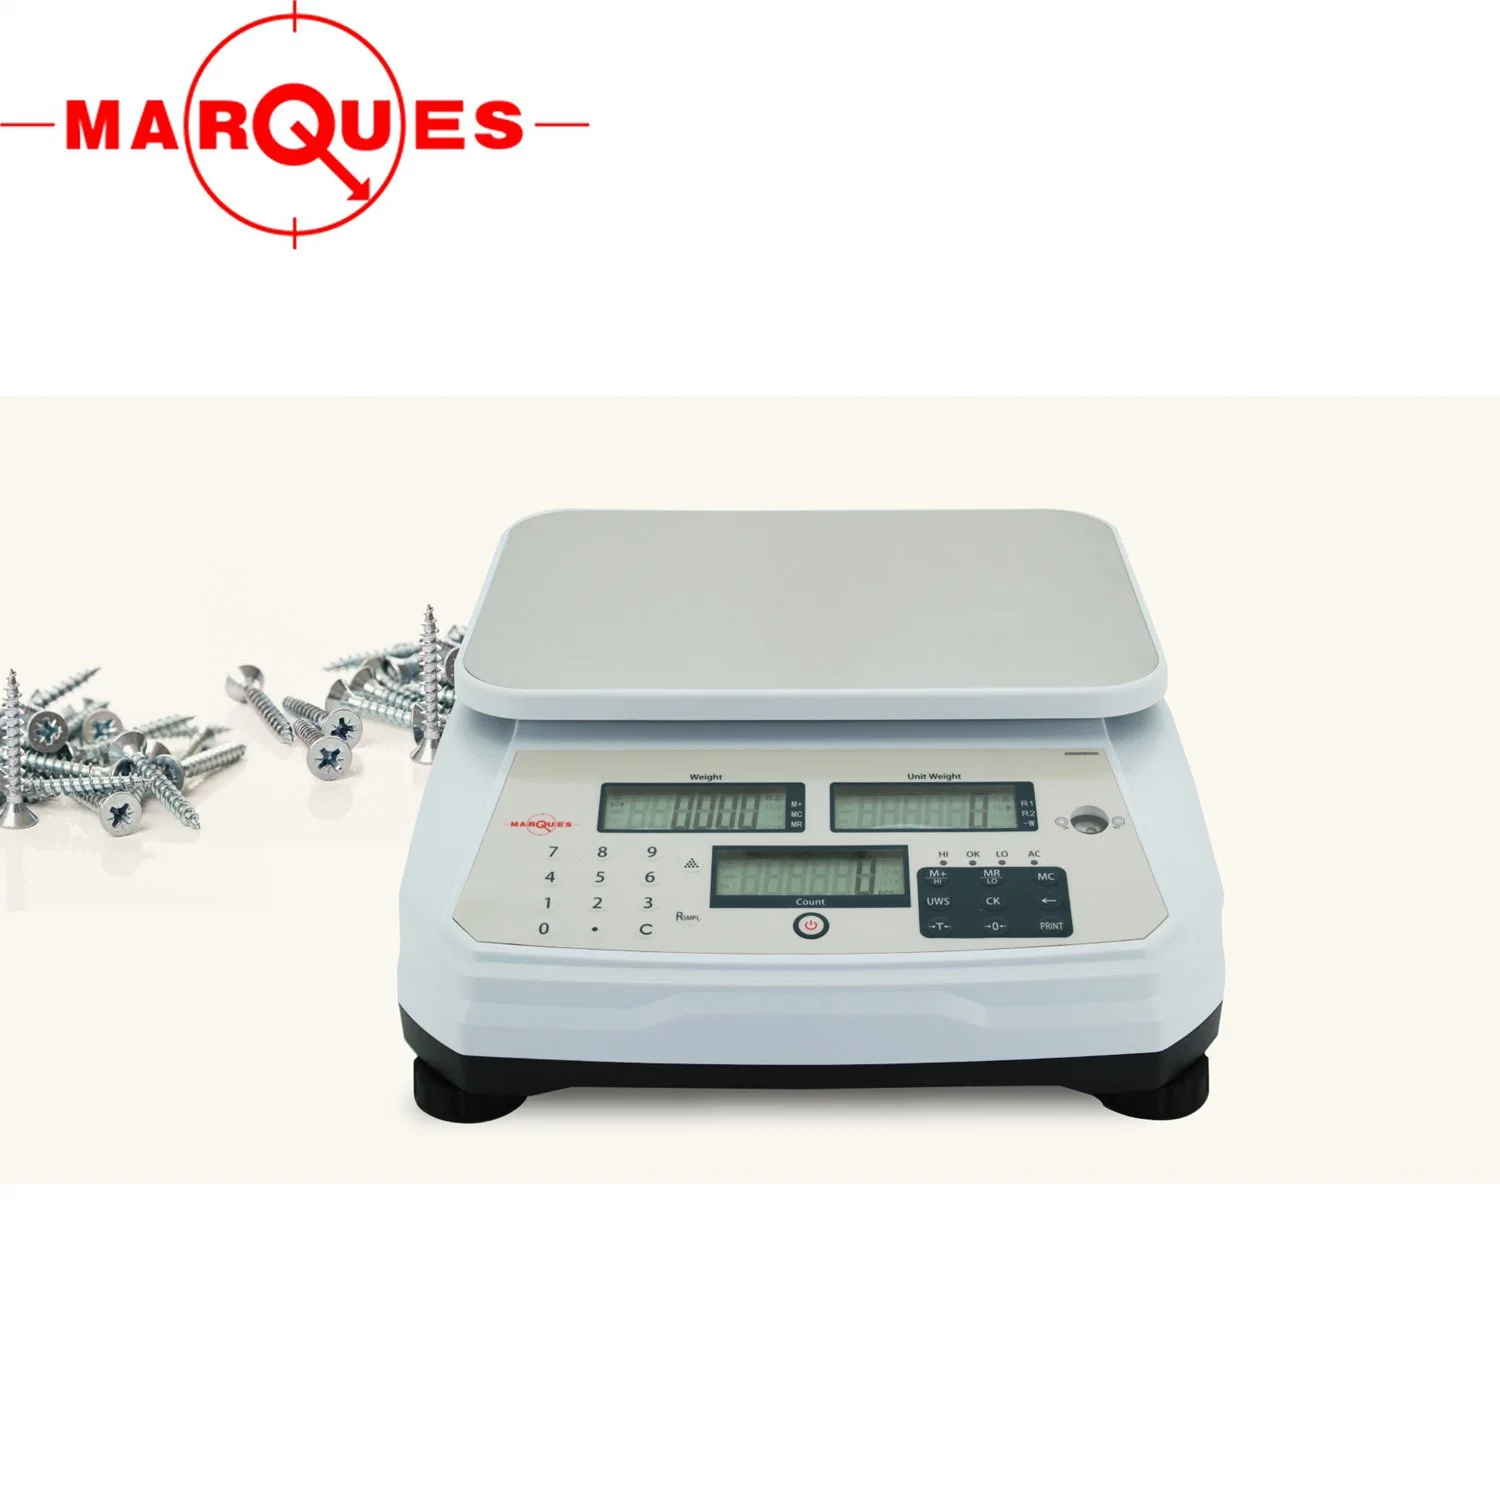 Stainless Steel Digital Counting and Weighing Electronic Scale High Precision 3kg